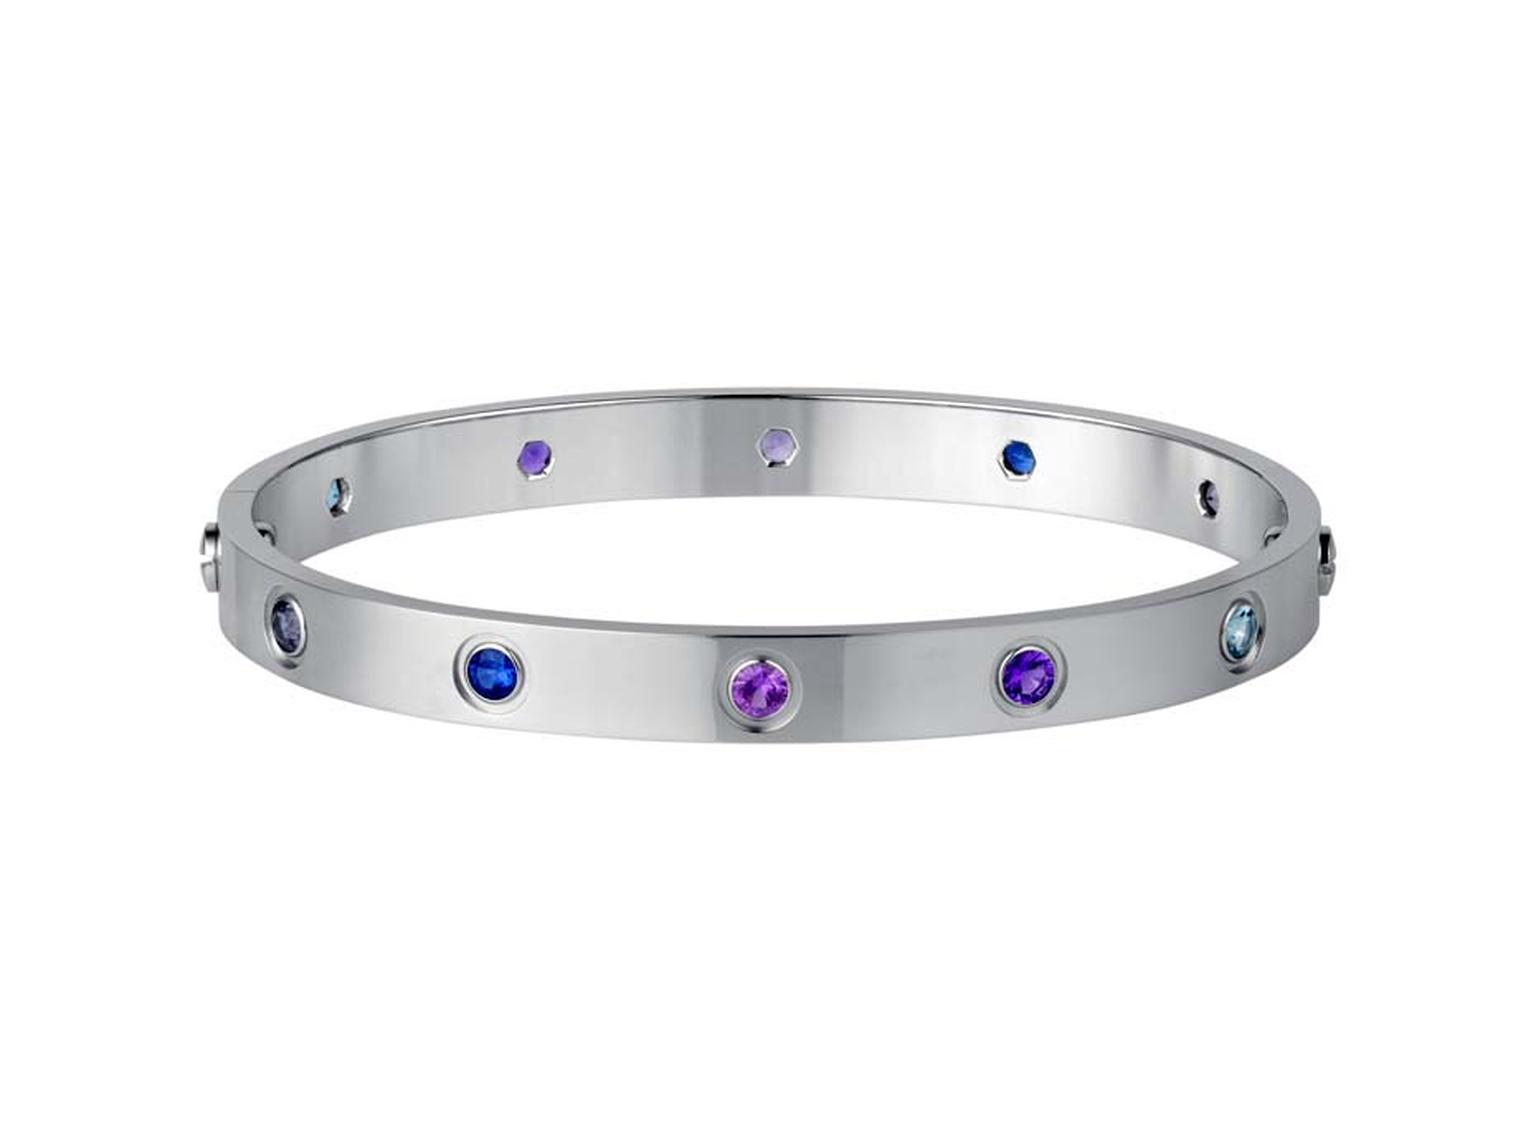 The Cartier LOVE bracelet is a Christmas classic. This version in white gold is dotted with 10 coloured gemstones (£6,250).